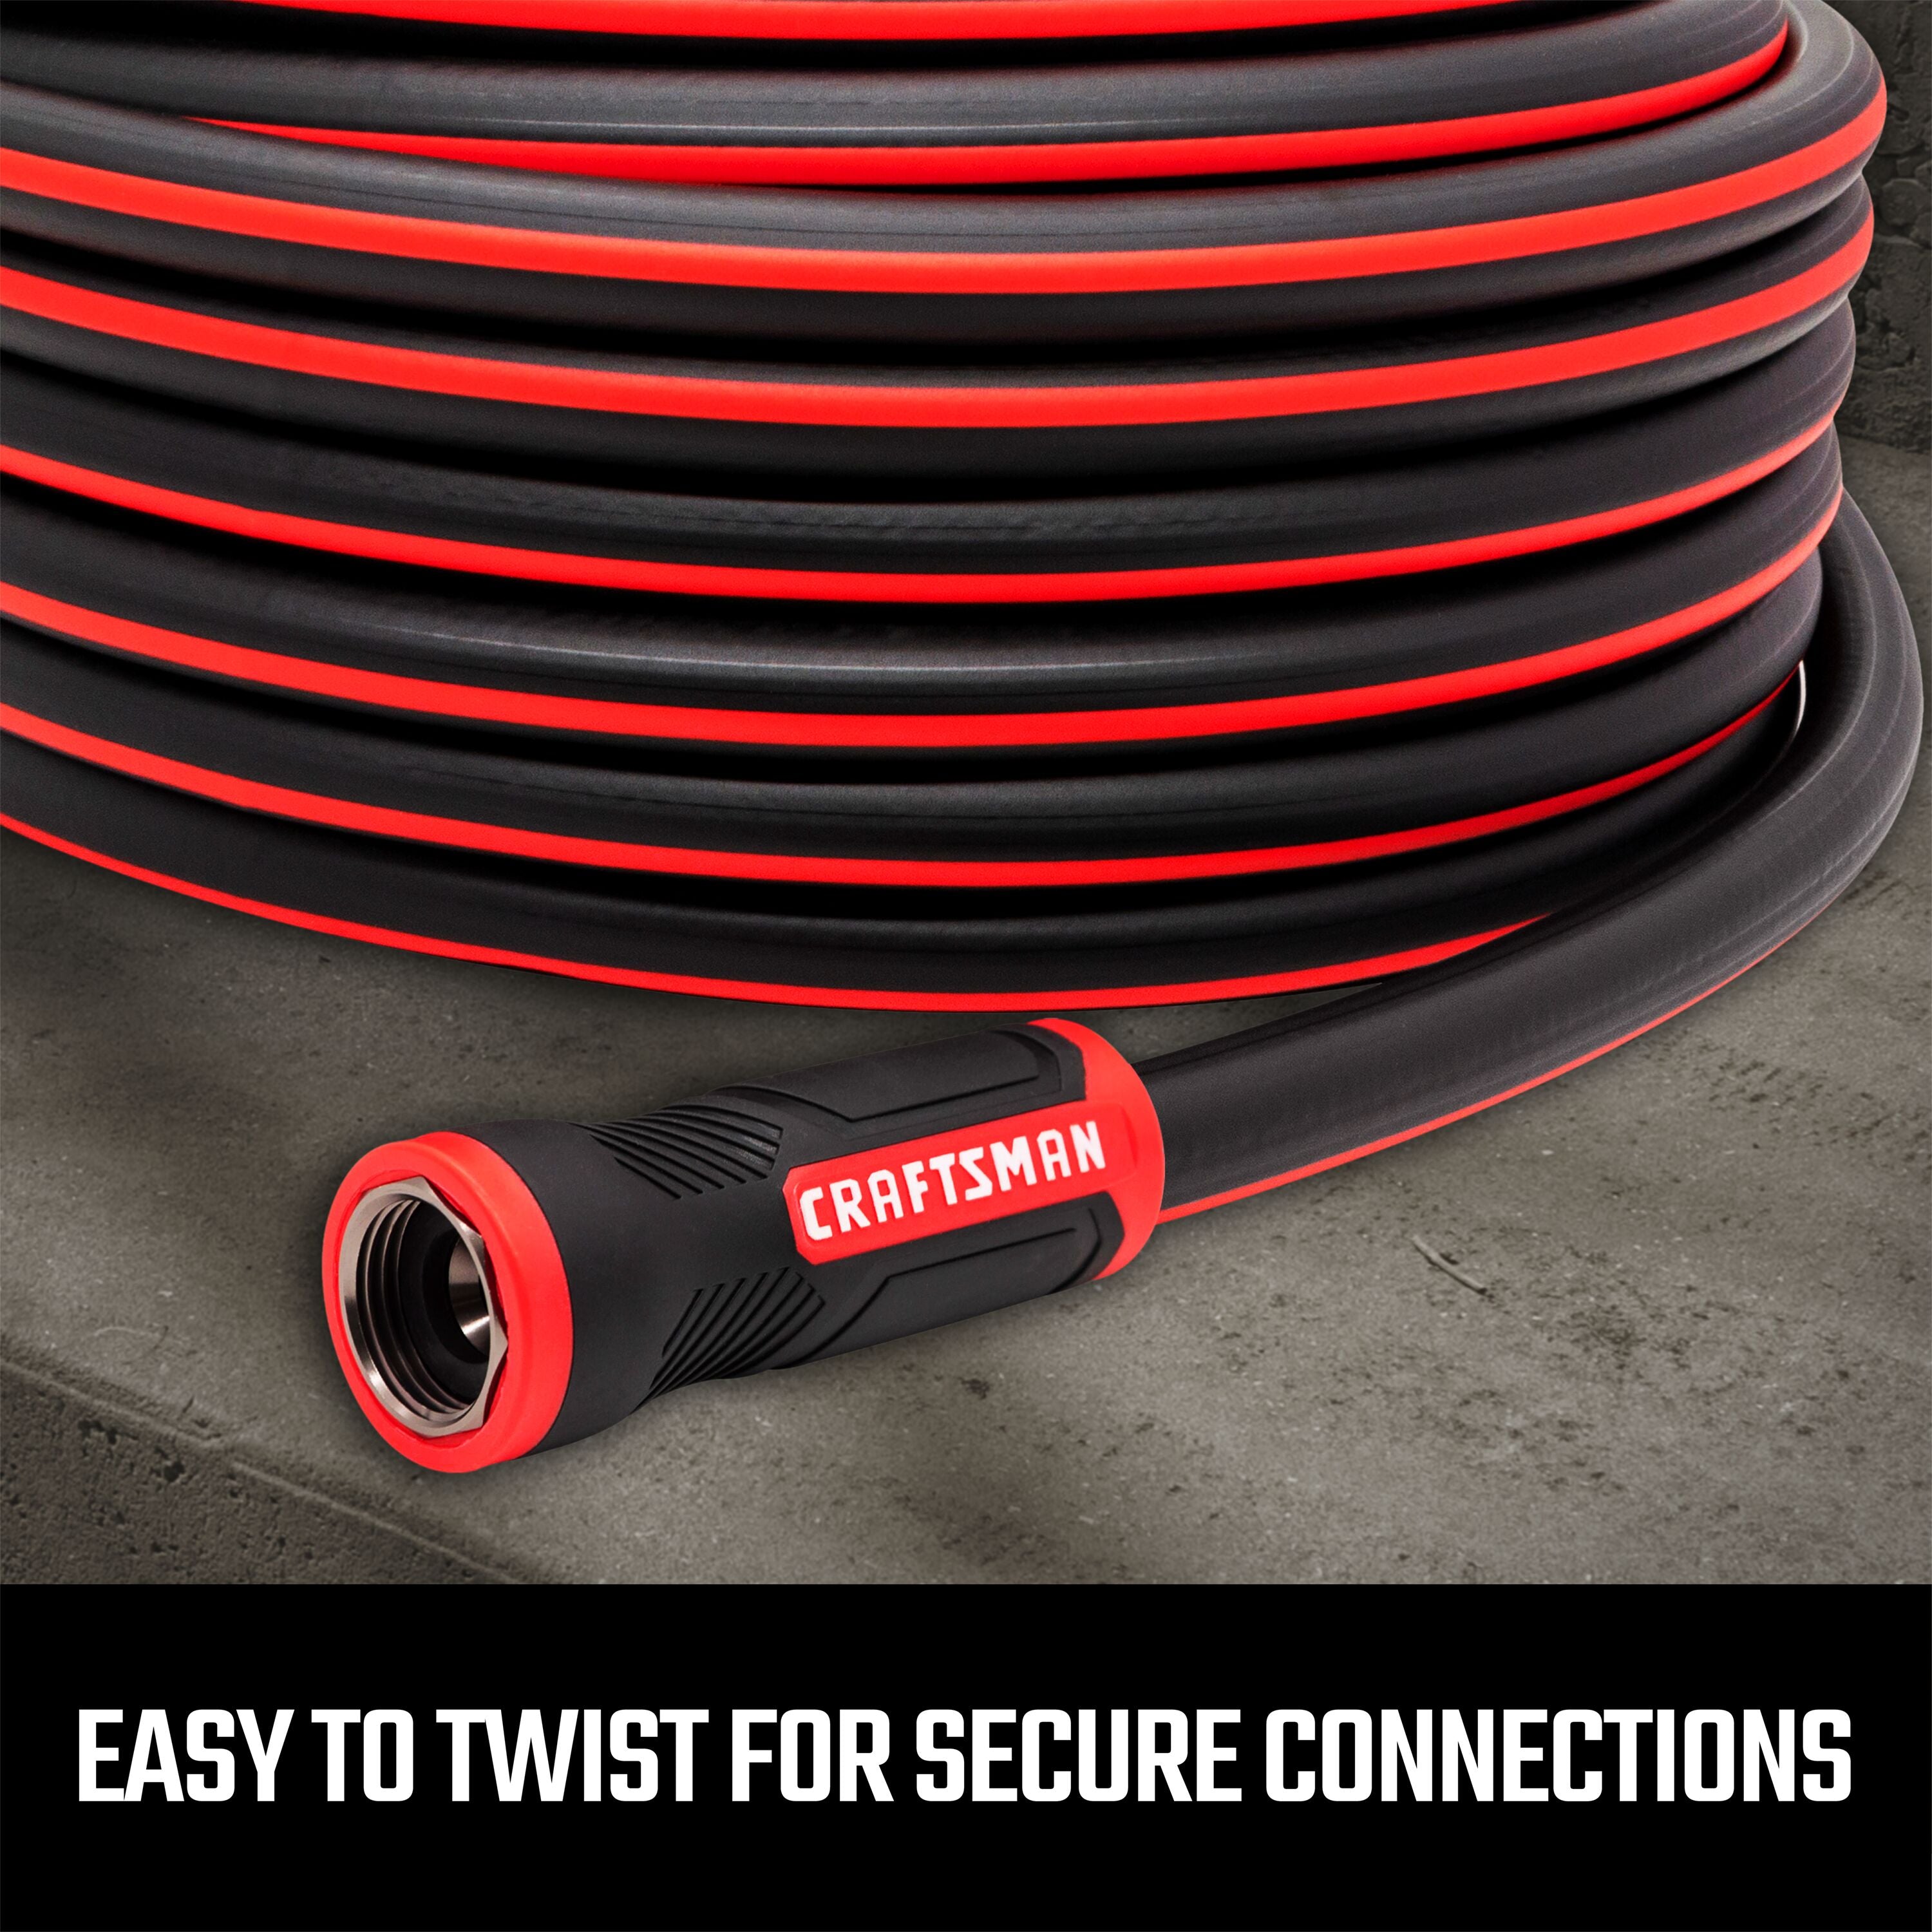 Craftsman professional-grade water hose, 100-foot by 5/8 inch featuring easy twist couplings for secure connections graphic